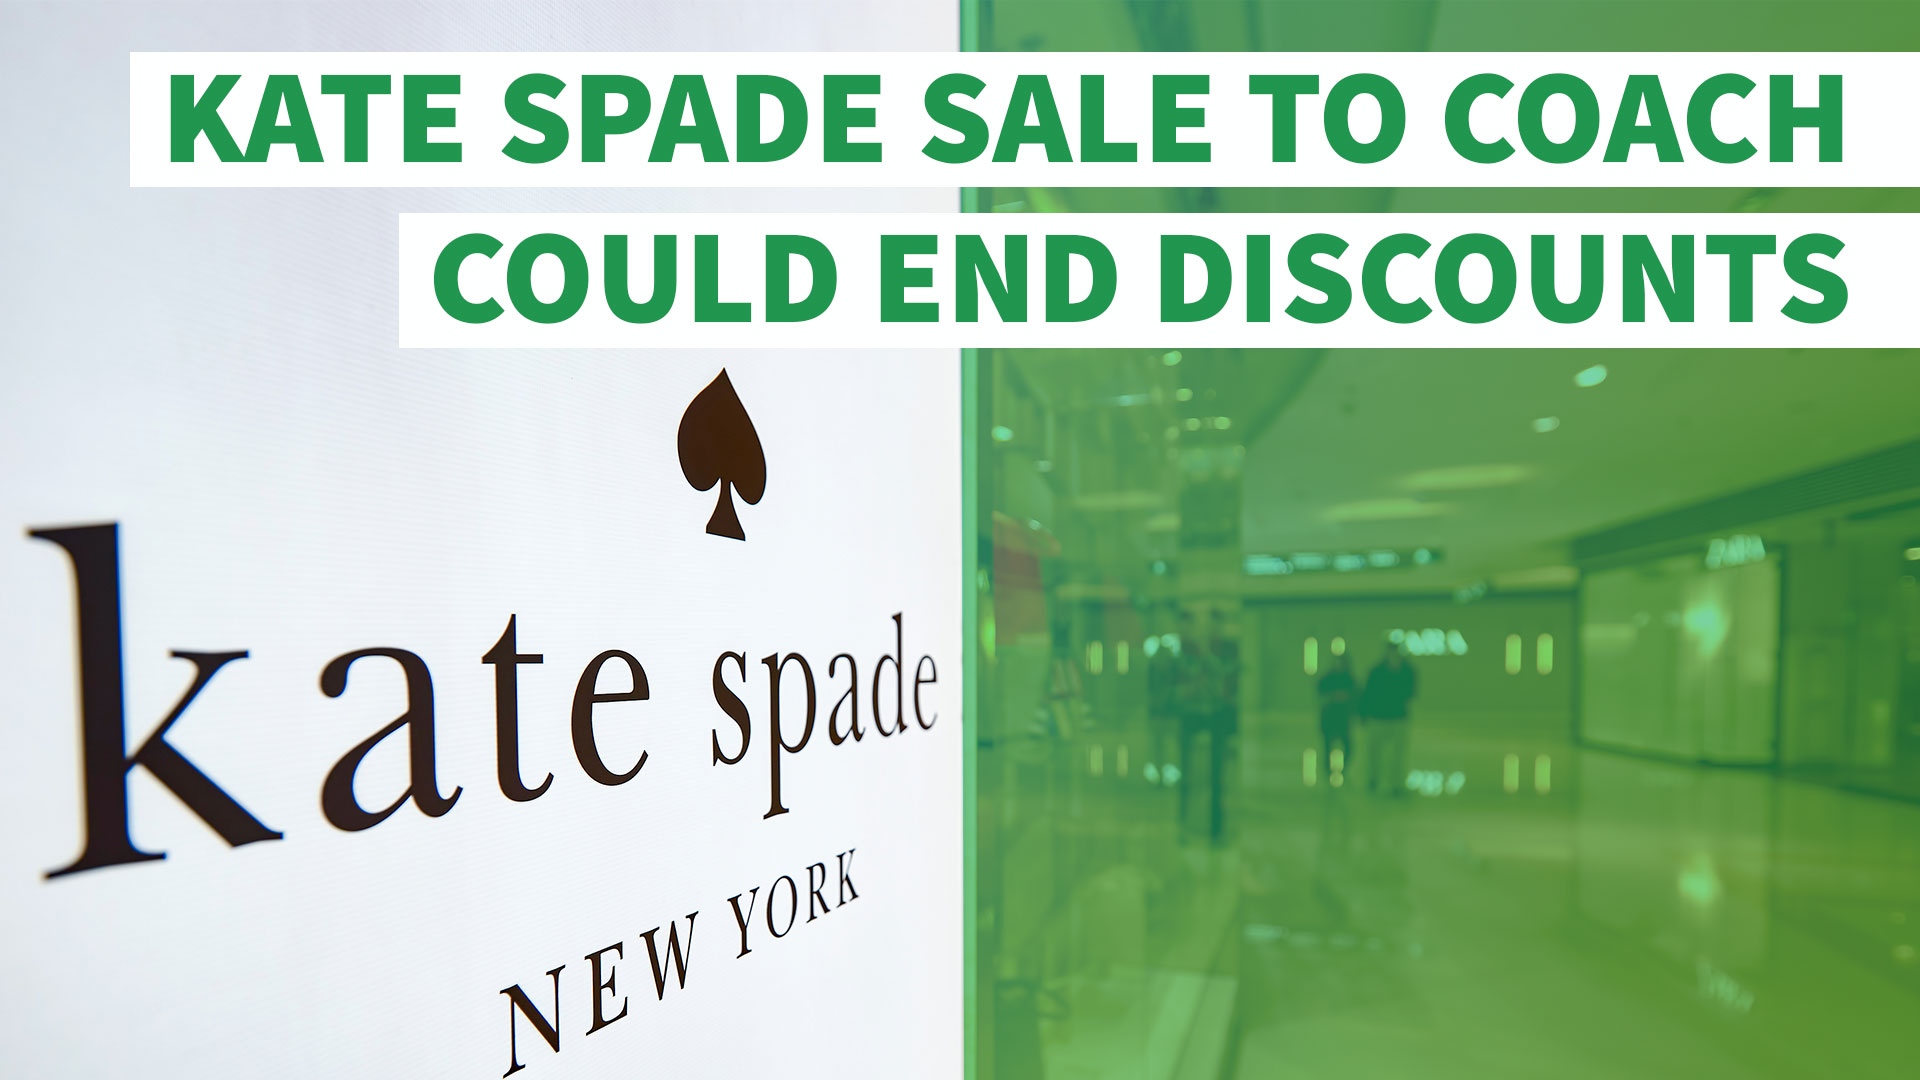 Coach Is Buying Kate Spade For $2.4 Billion